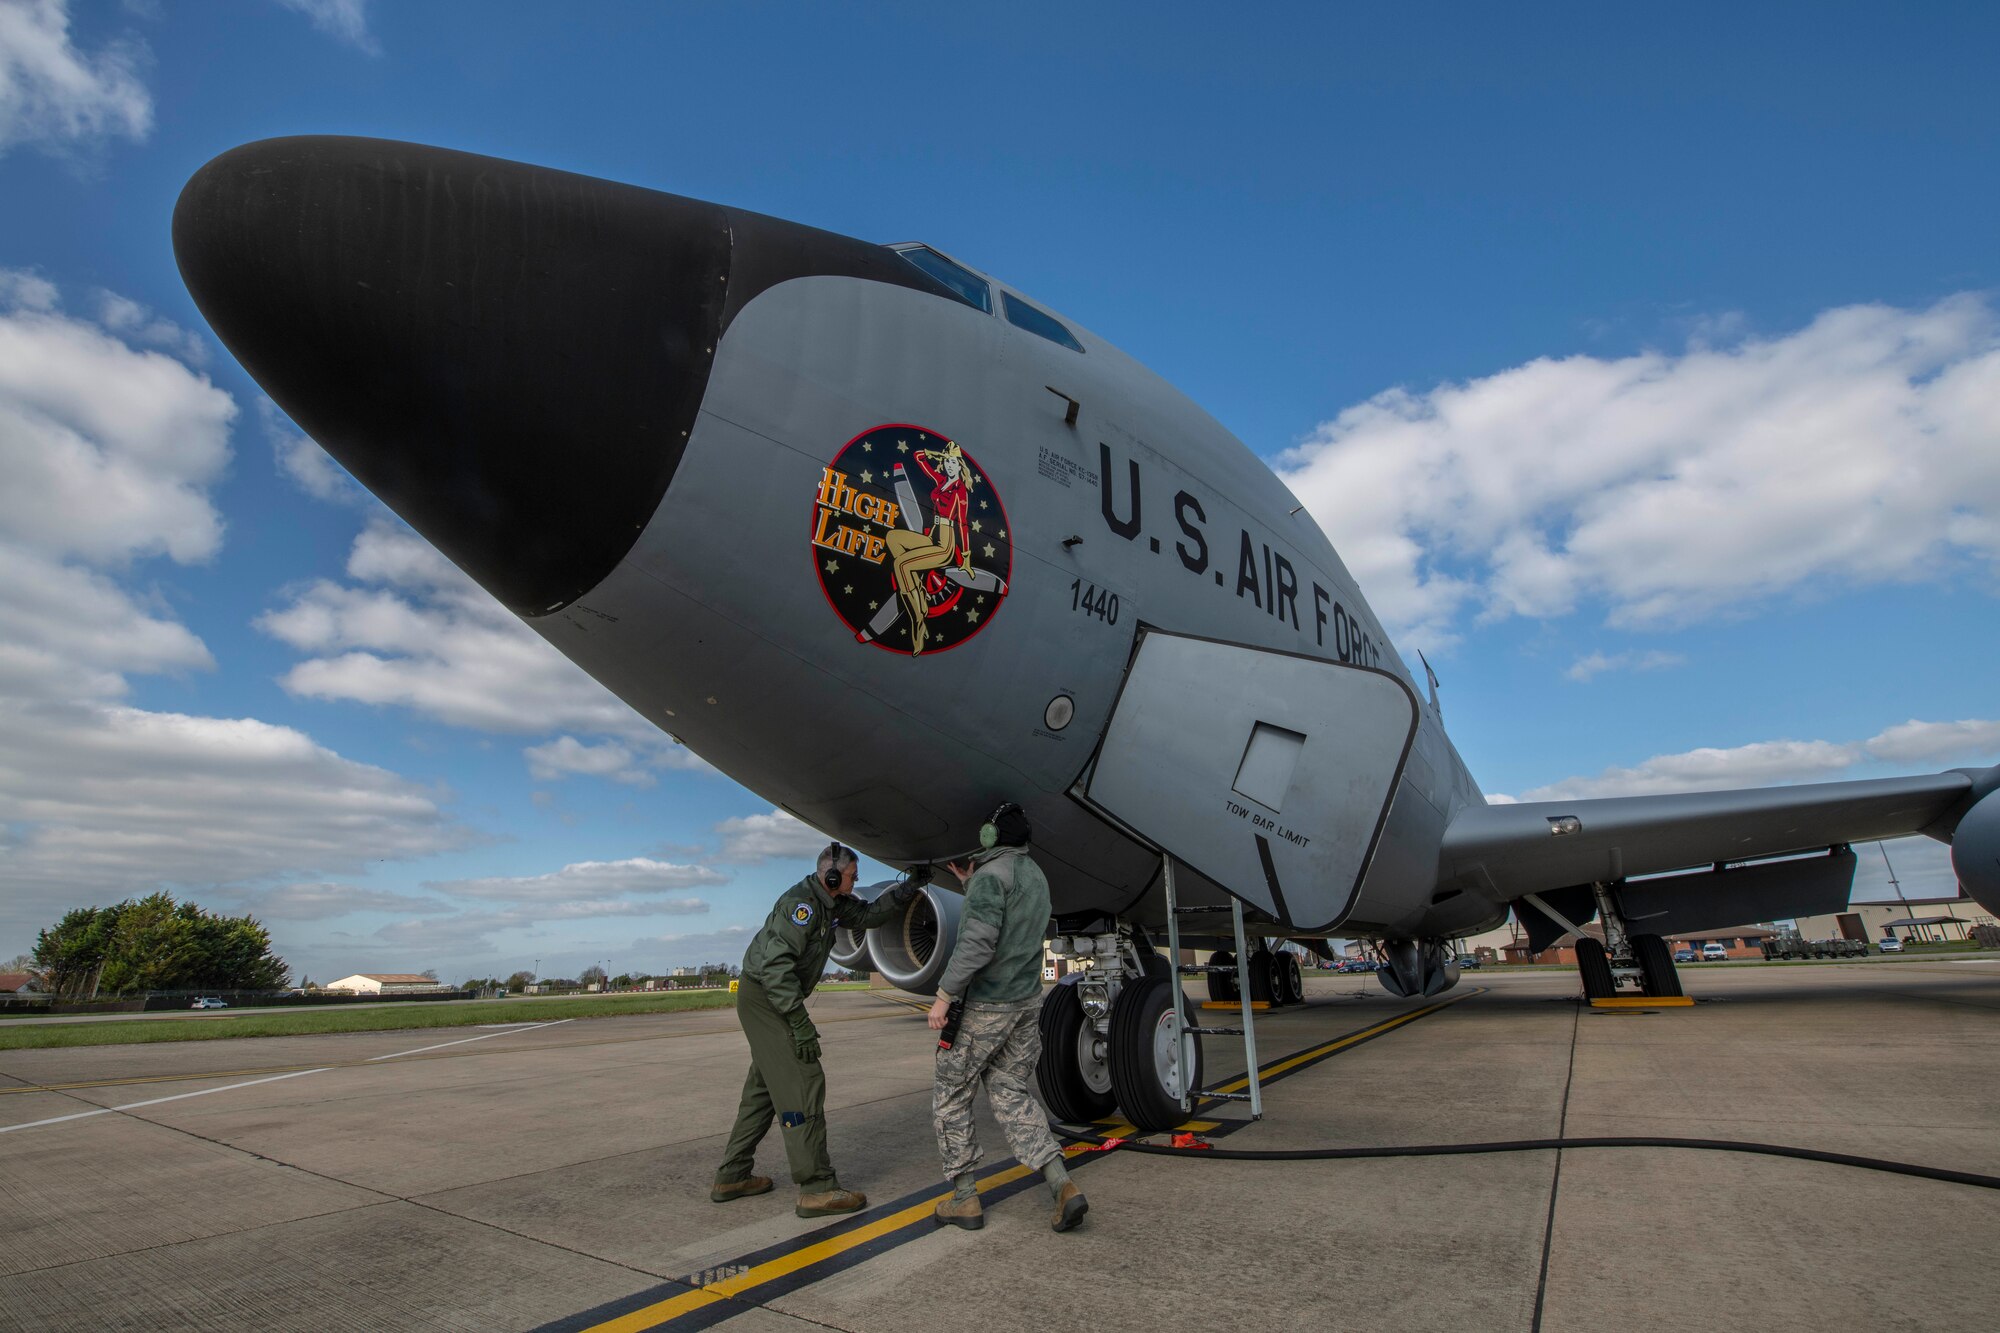 U.S. Air Force Airman 1st Class Chandra Beratto, 100th Aircraft Maintenance Squadron crew chief, and U.S. Air Force Maj. Michael Goodwin, 351st Air Refueling Squadron aircraft commander, inspect and prepare a KC-135 Stratotanker prior to takeoff at RAF Mildenhall, England, April 10, 2019. Crew chiefs are responsible for maintaining aircraft and ensuring that they are ready to fly at a moment’s notice. (U.S. Air Force photo by Senior Airman Luke Milano)